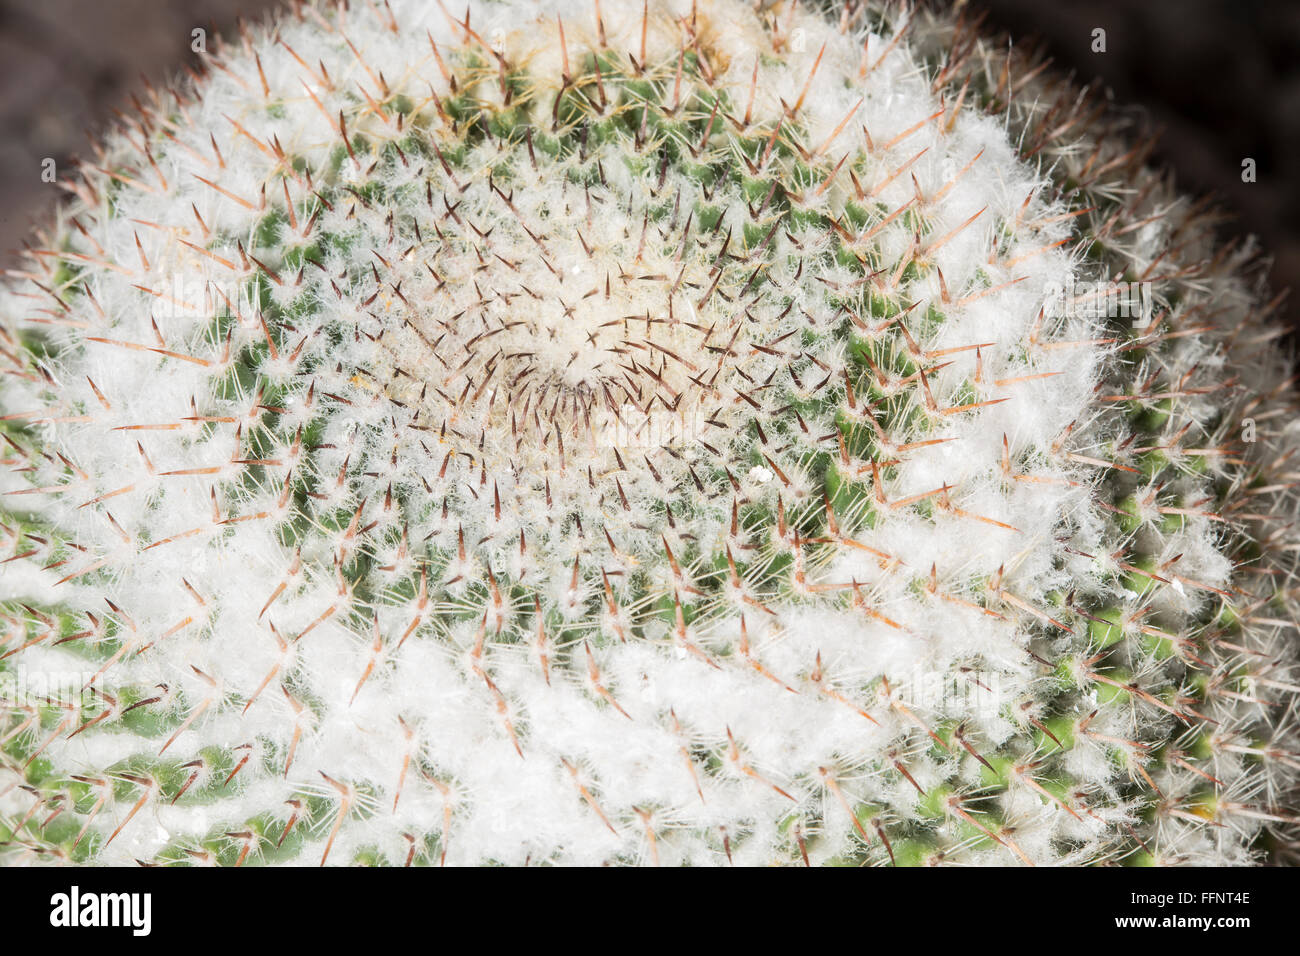 Macro view of the small circular spines of a Mammillaria formosa cactus Stock Photo